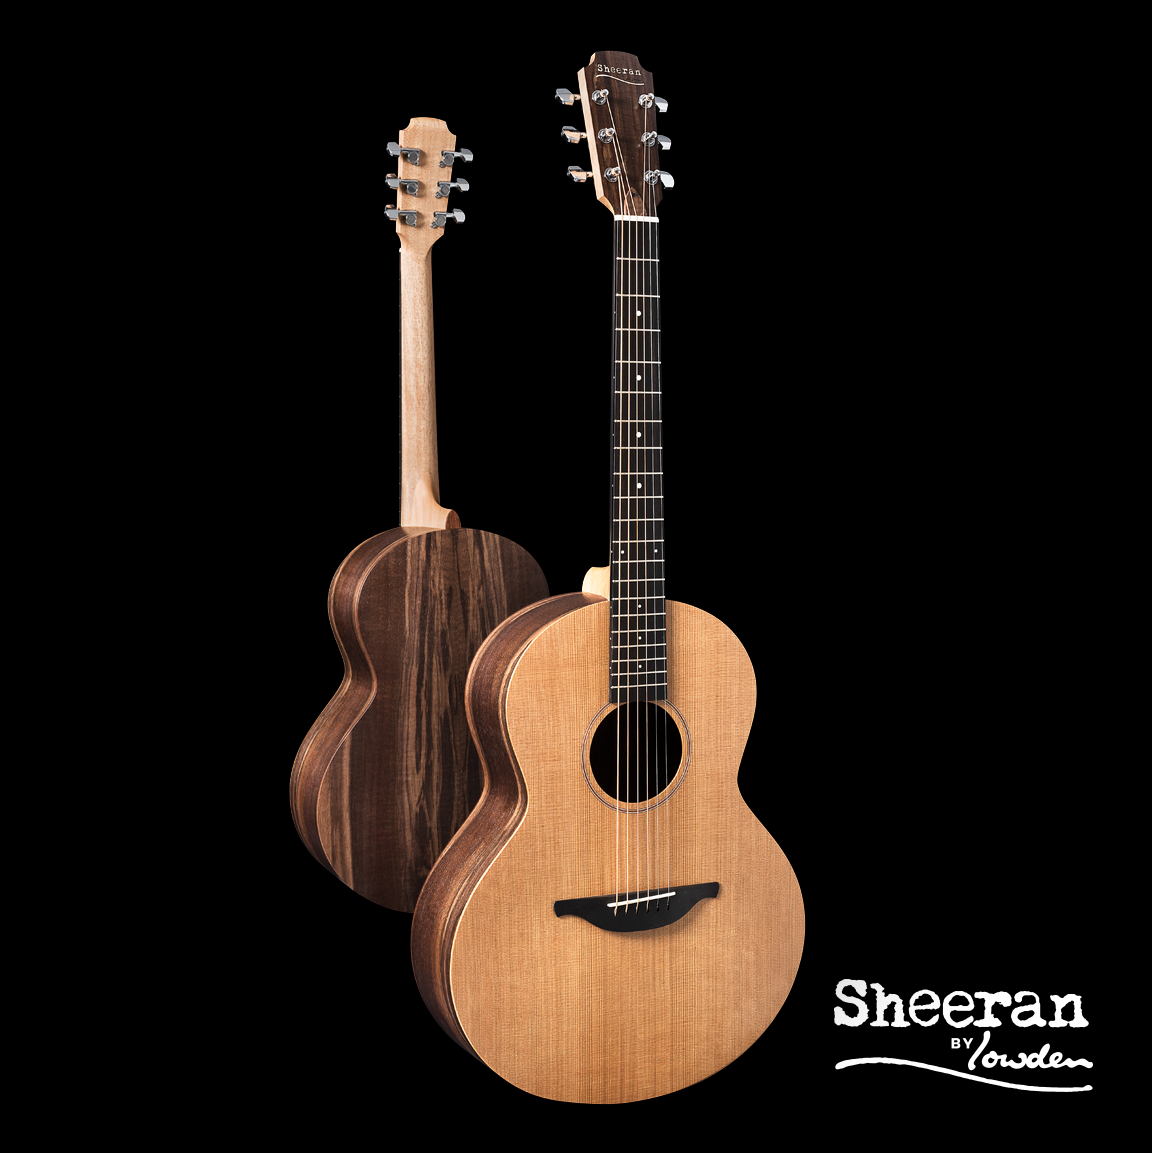 Sheeran by Lowden S01 Solid Cedar Top, Walnut back and sides, No pickup